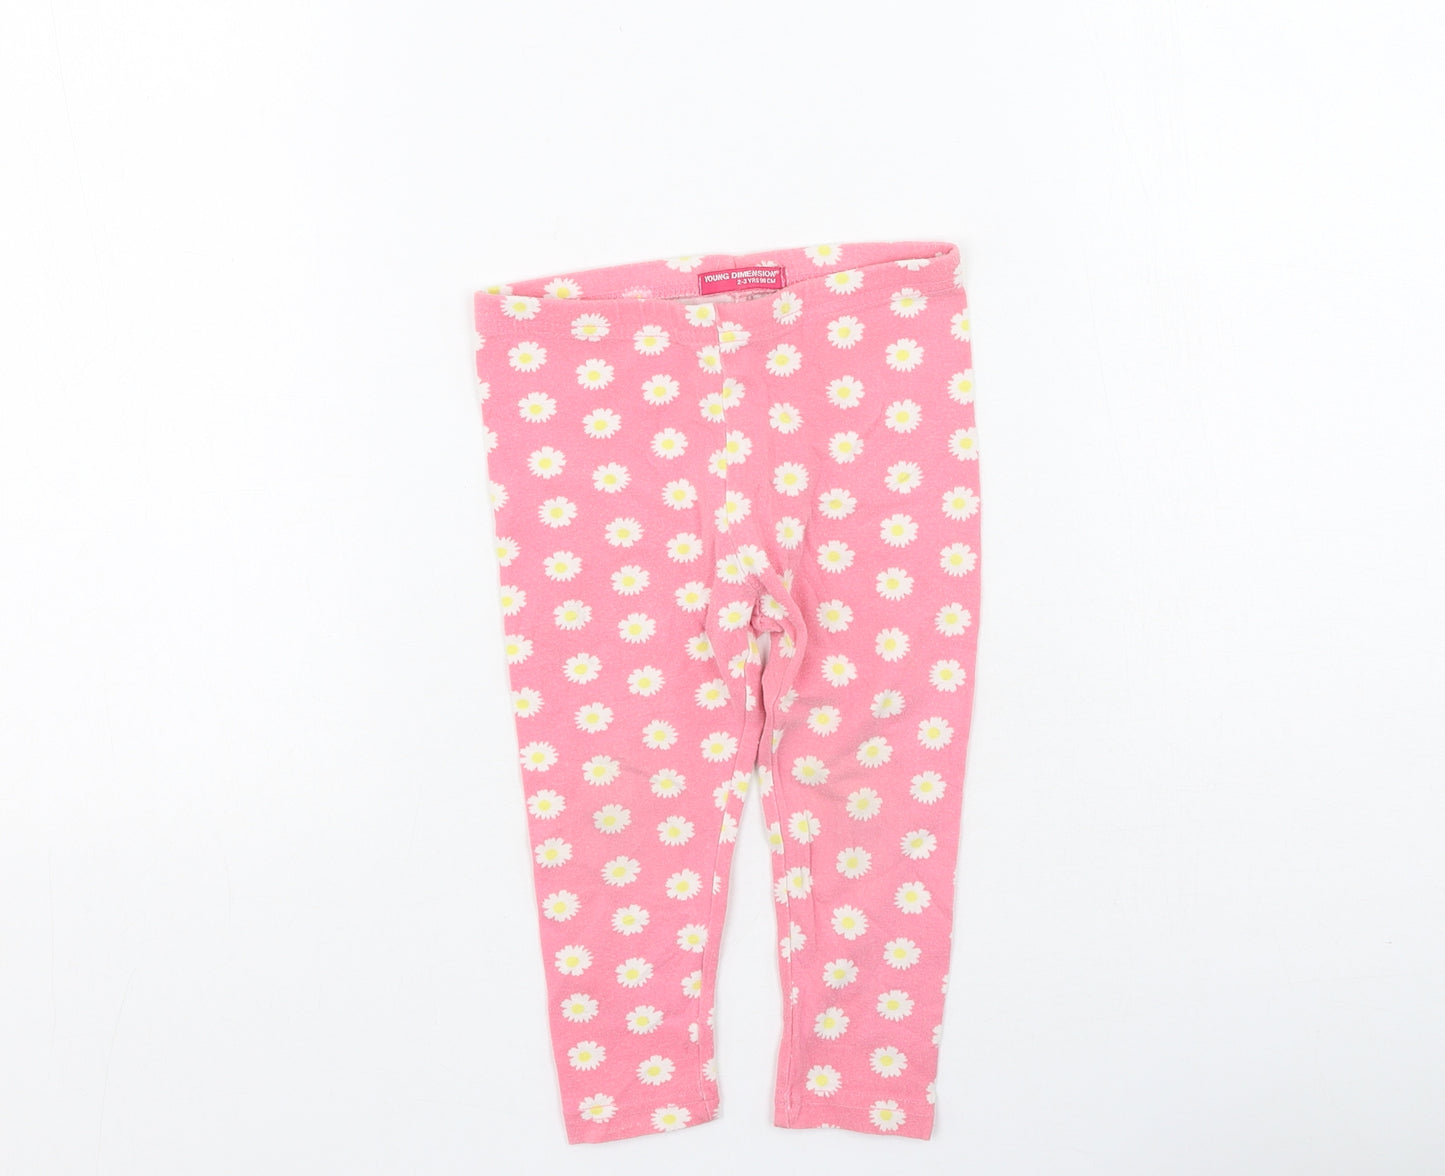 Young Dimension Girls Pink  Cotton Jegging Trousers Size 2-3 Years  Regular  - flowers